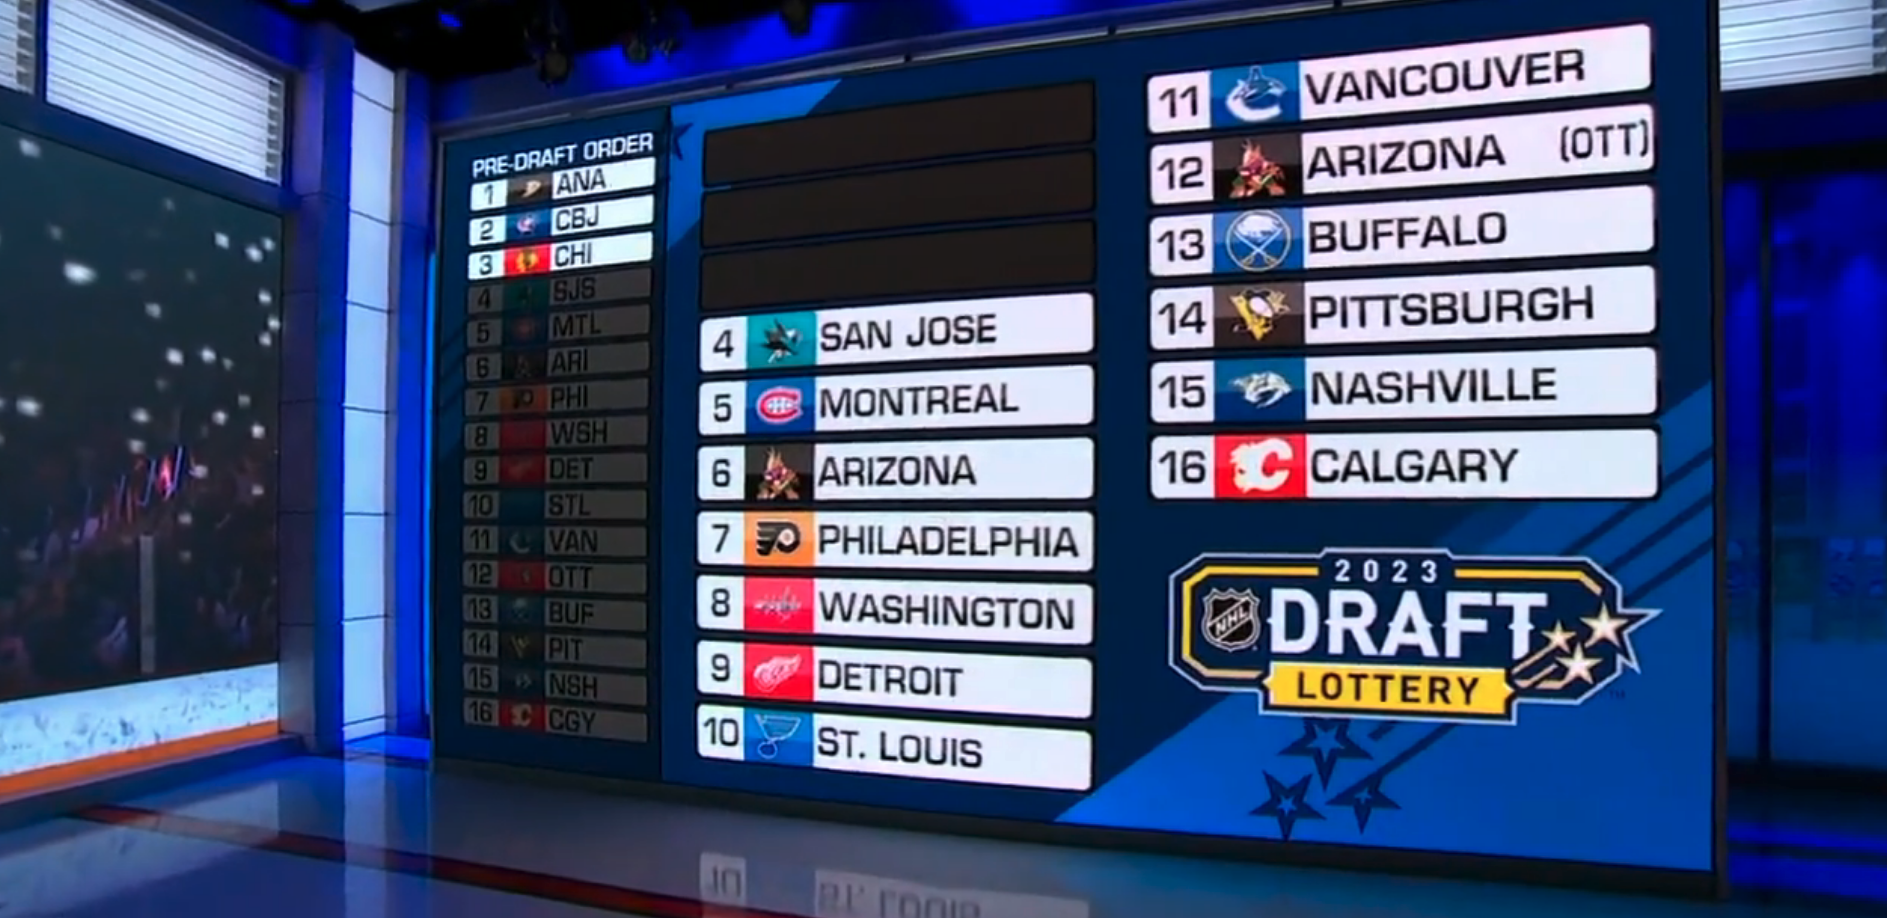 ESPN spoiled the results of the 2023 NHL Draft Lottery early in stunning broadcast snafu